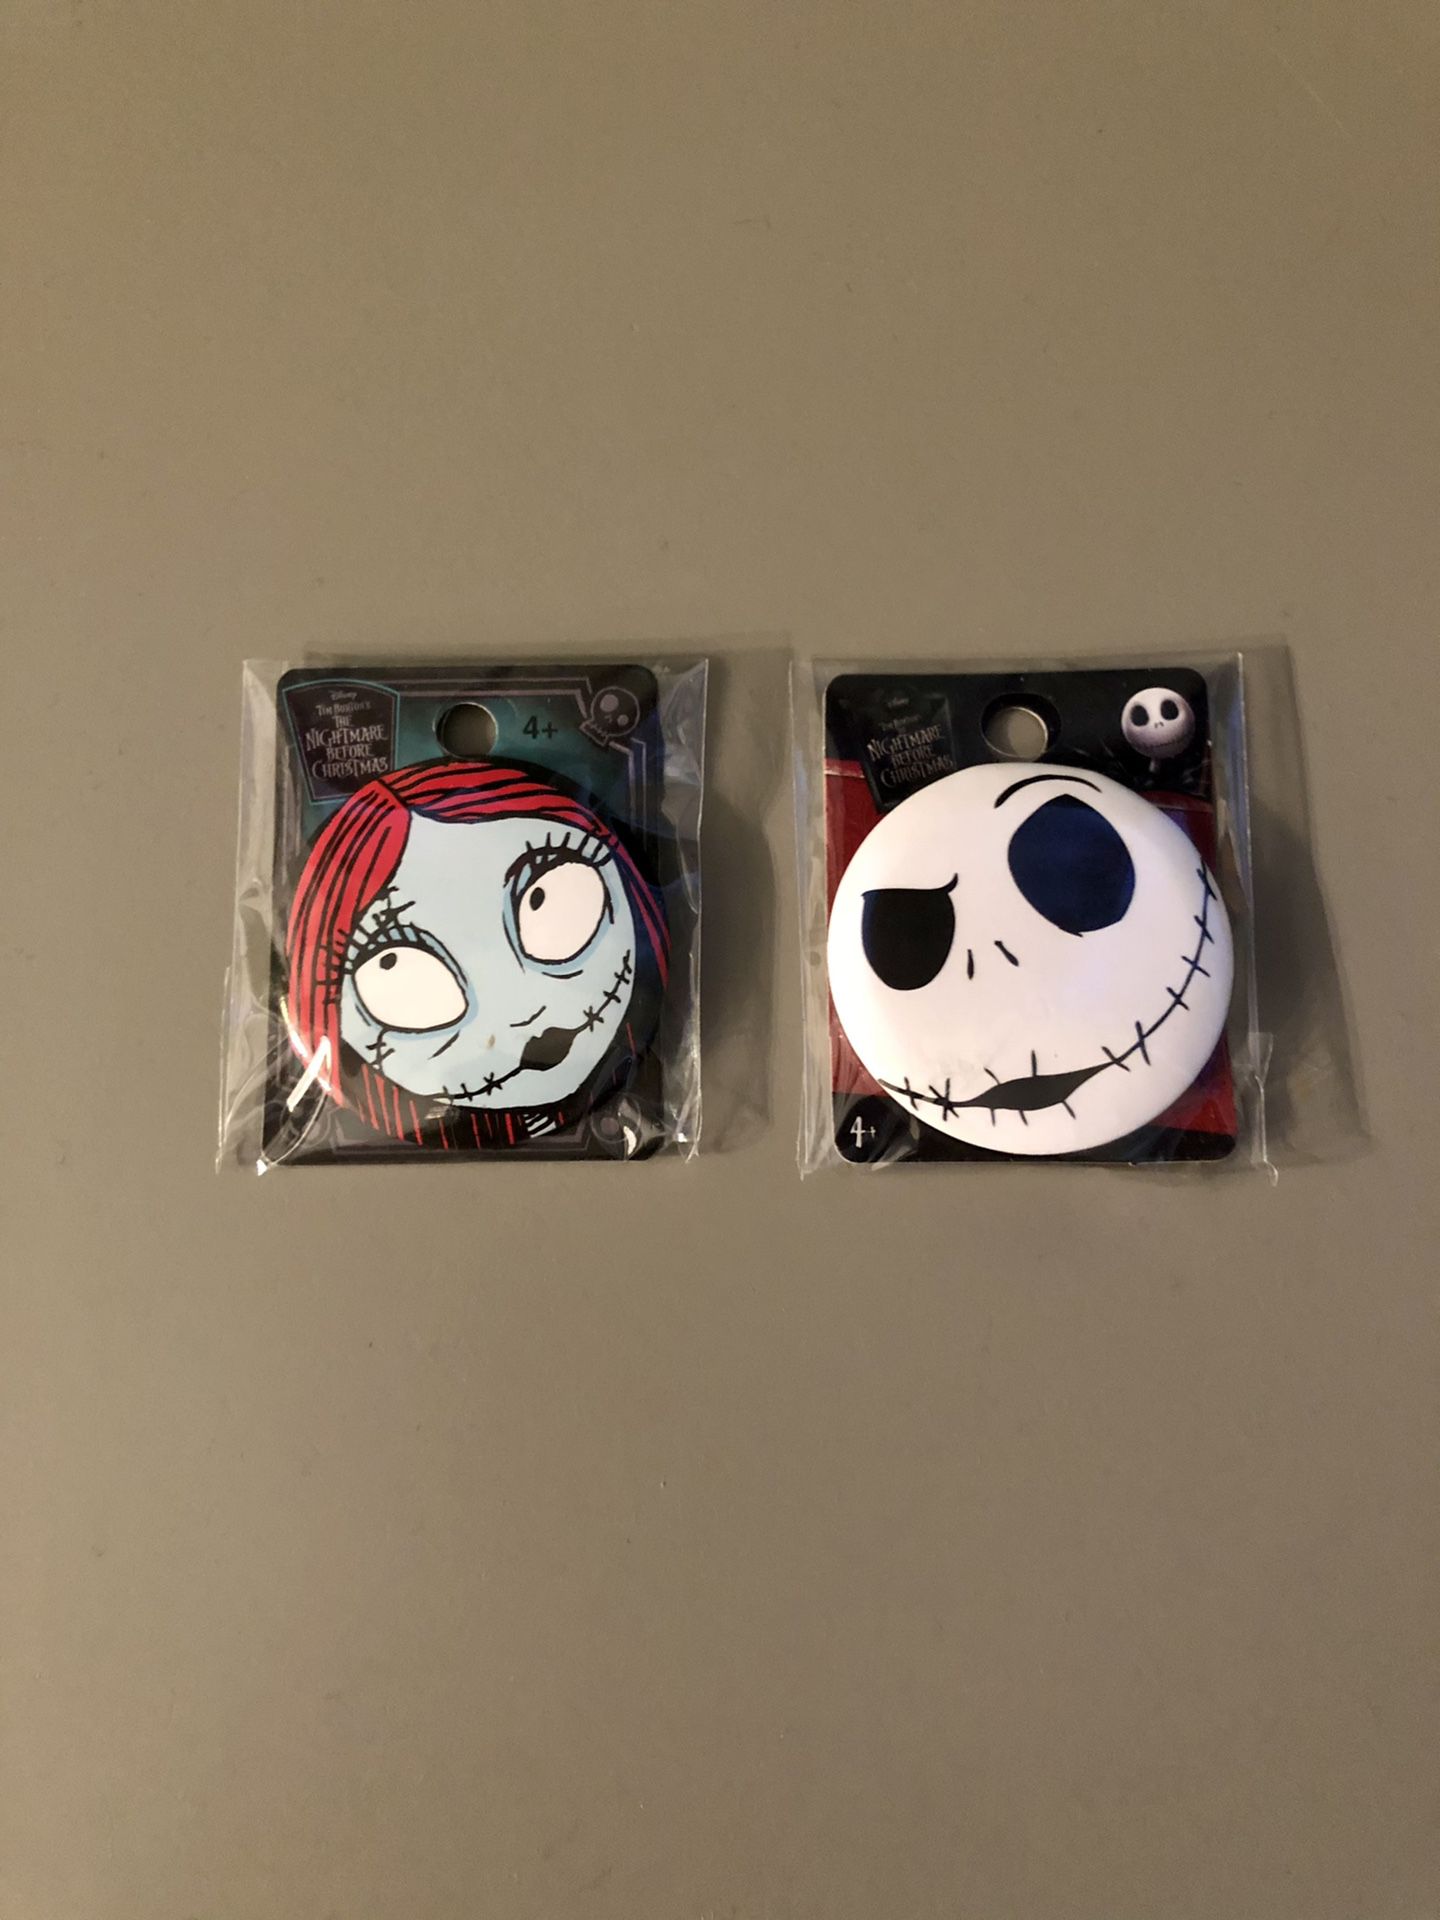 DISNEY Nightmare Before Christmas, Sally and Jack Skellington pins—both for $10